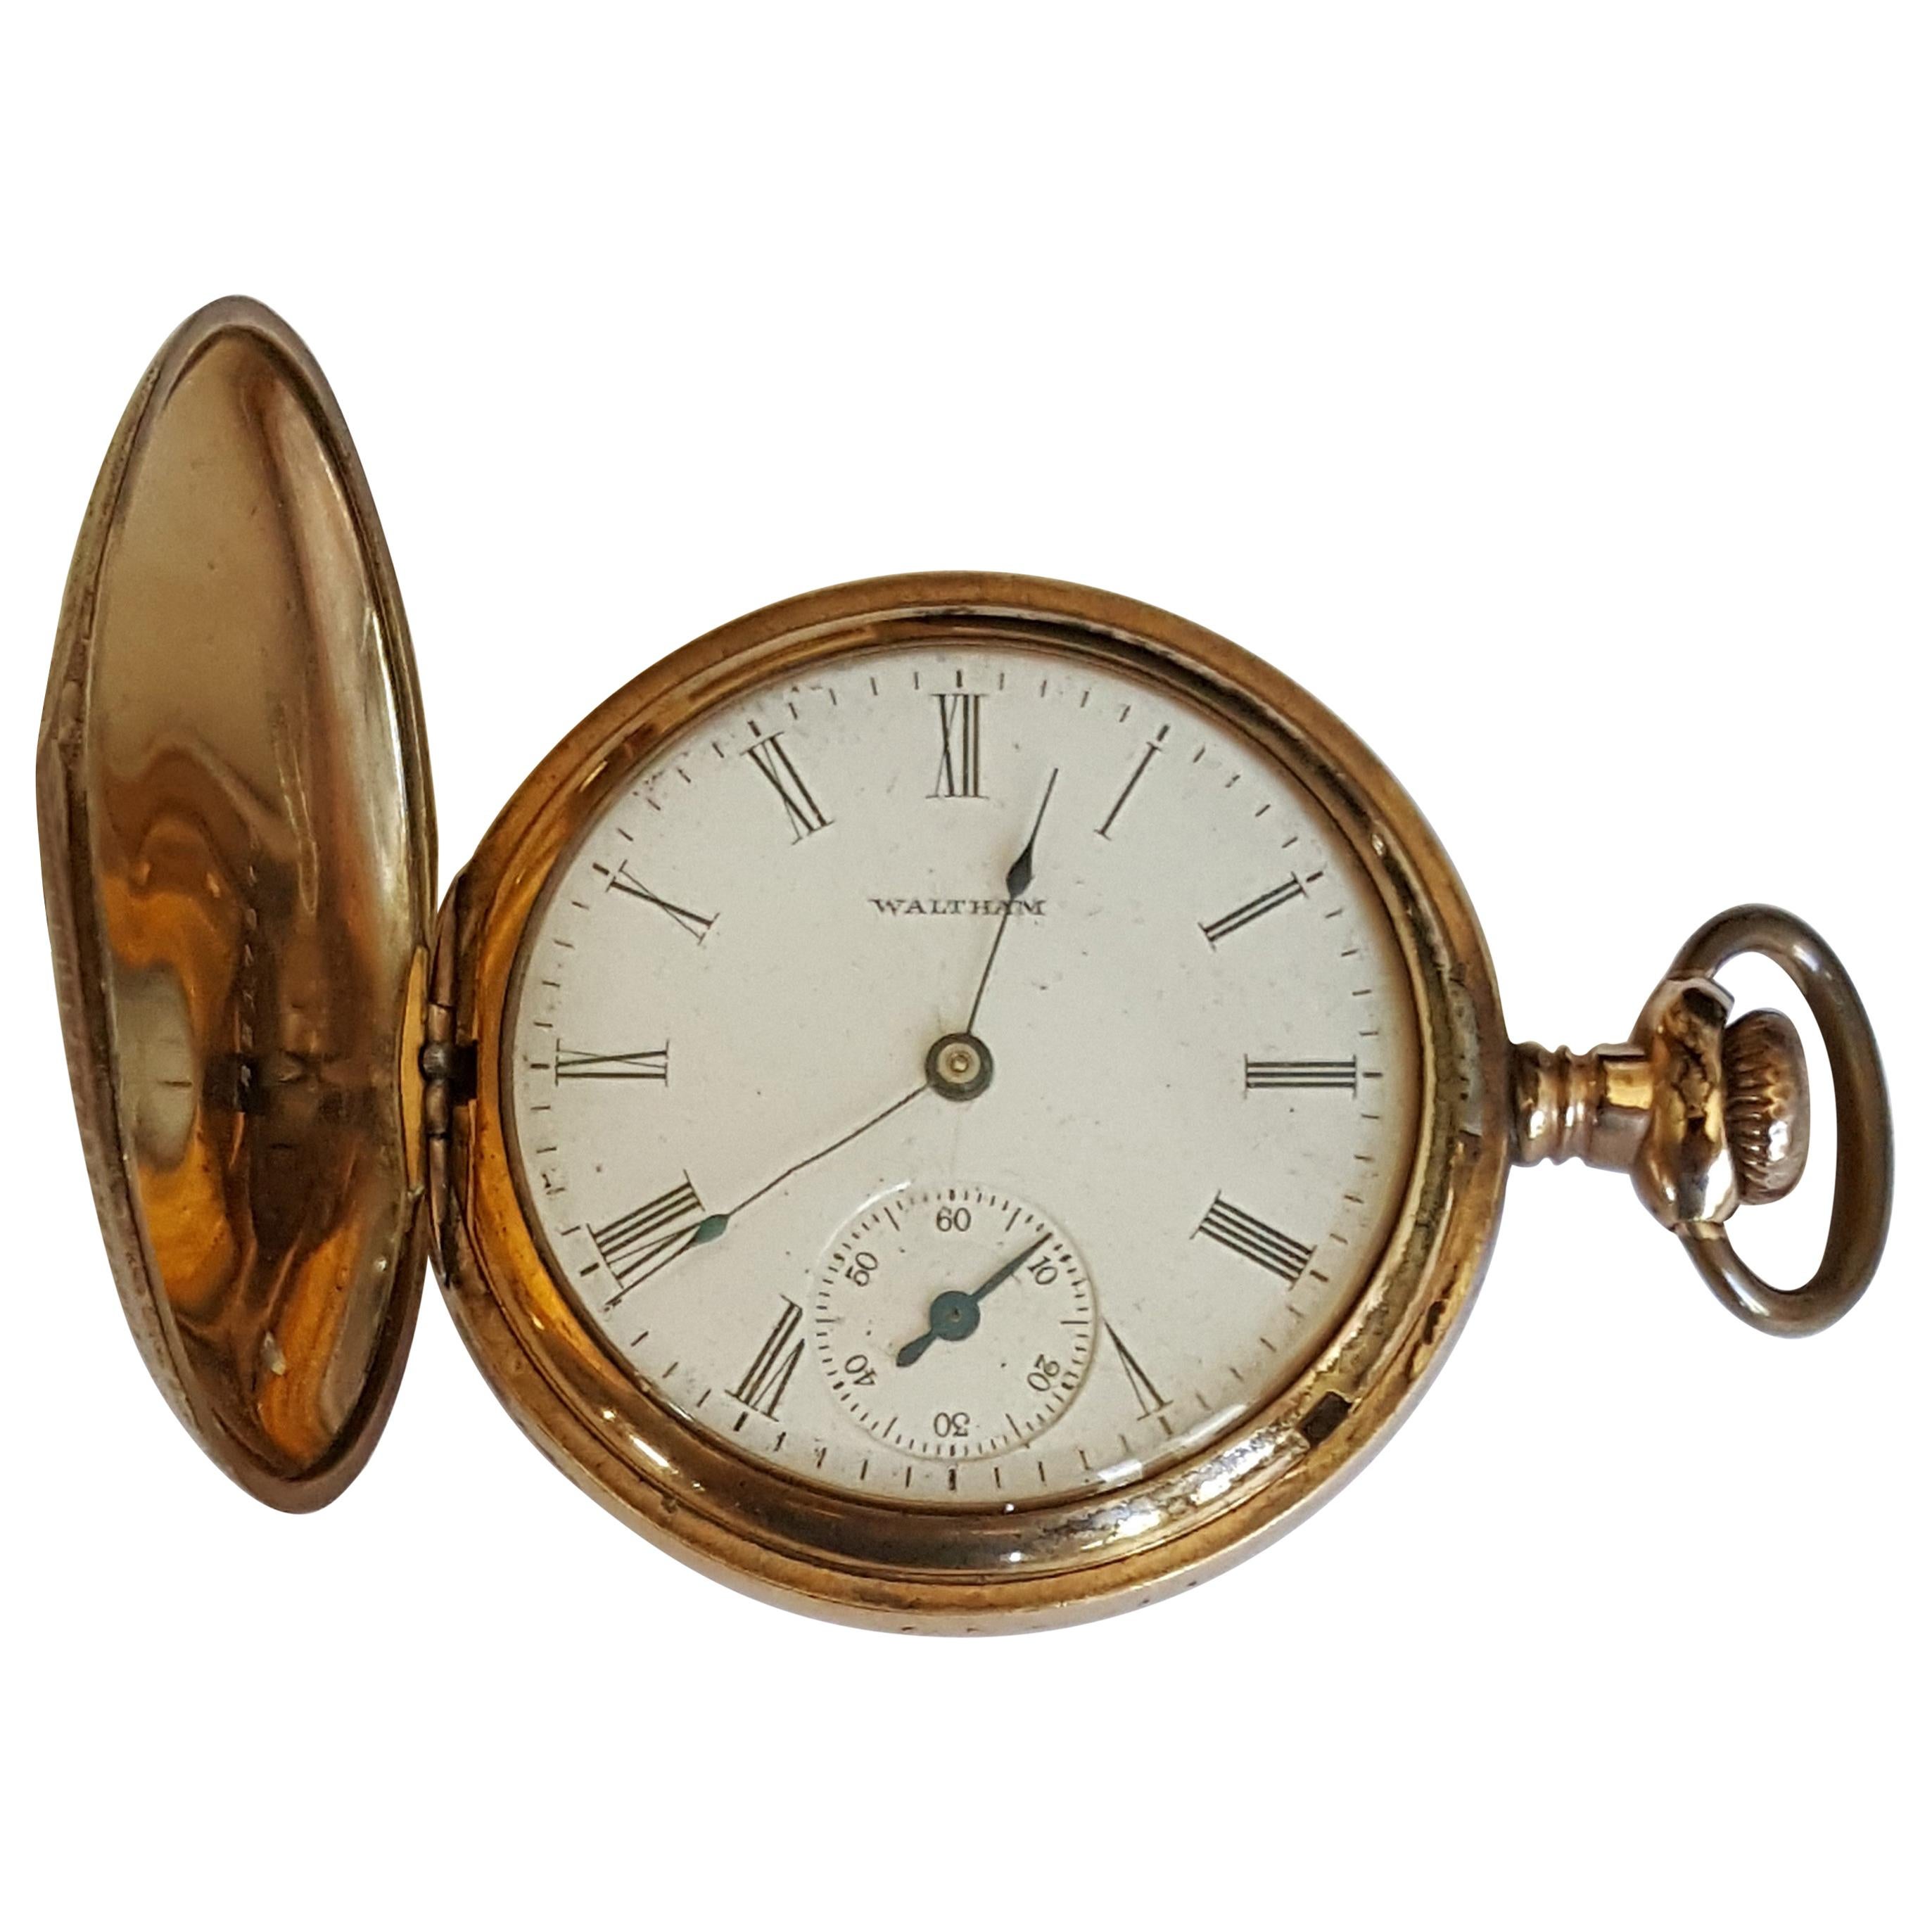 Vintage Gold-Plated Waltham Pocket Watch, Working, Year 1907, 7Jewel, Model 1899